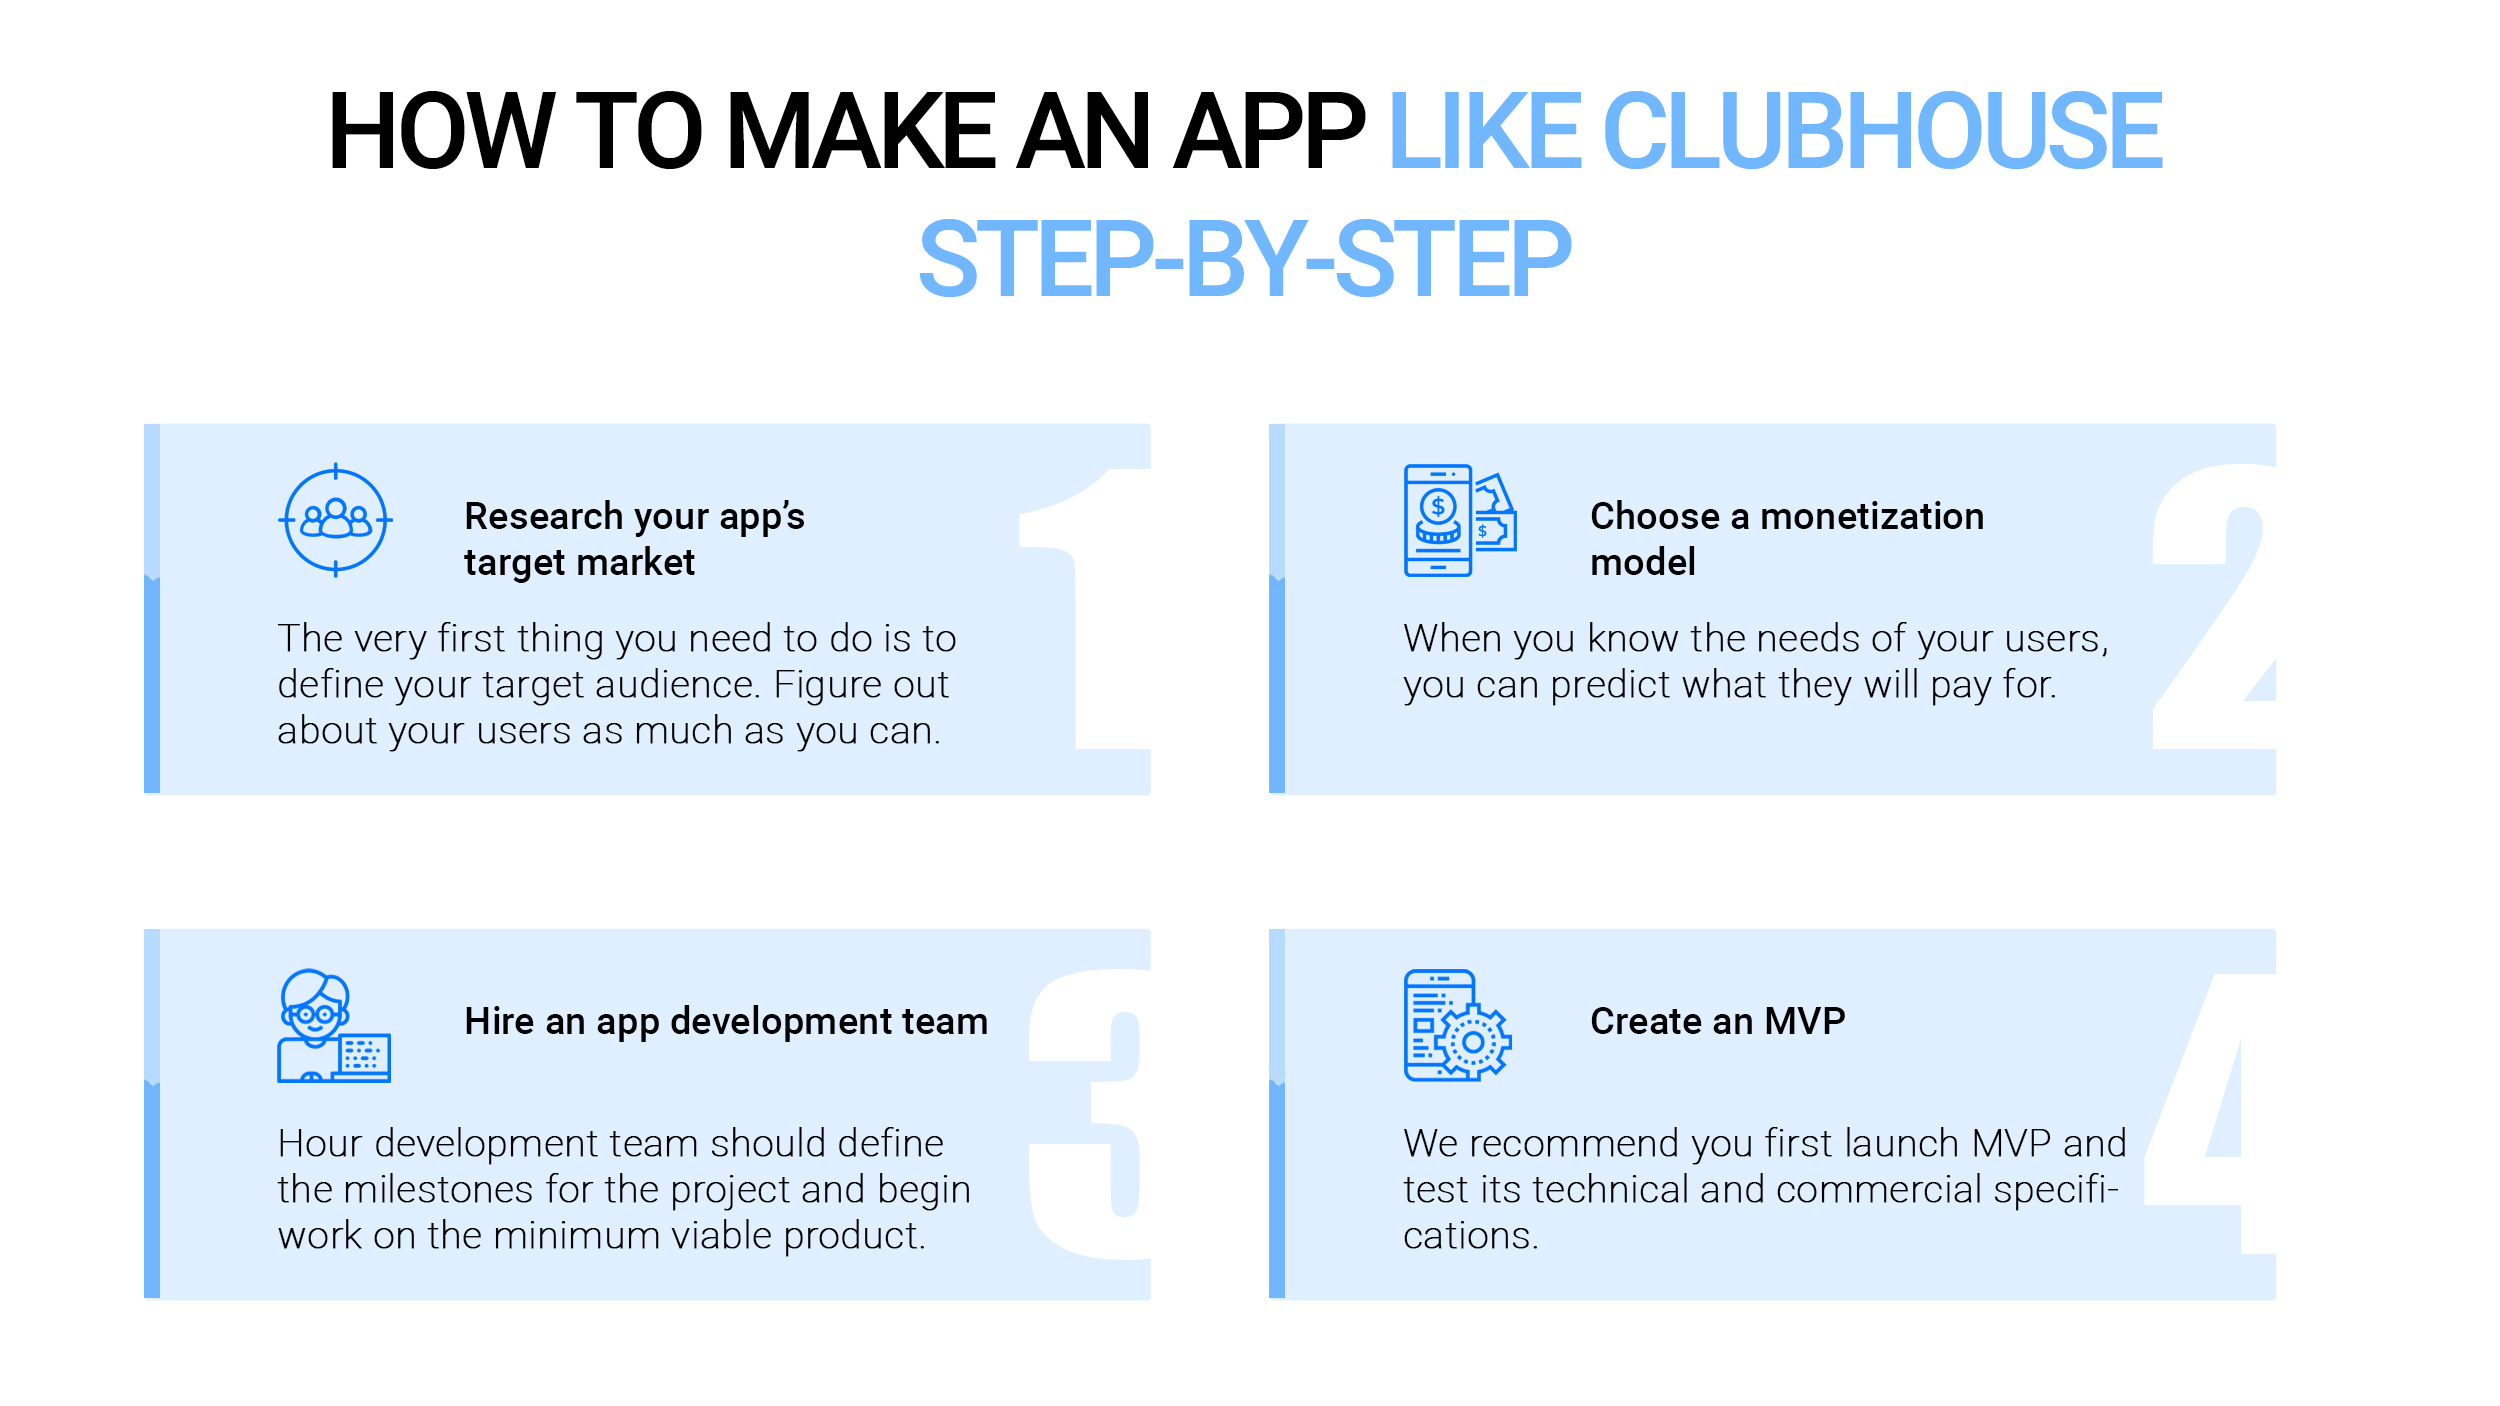 How to make an app like Clubhouse step-by-step